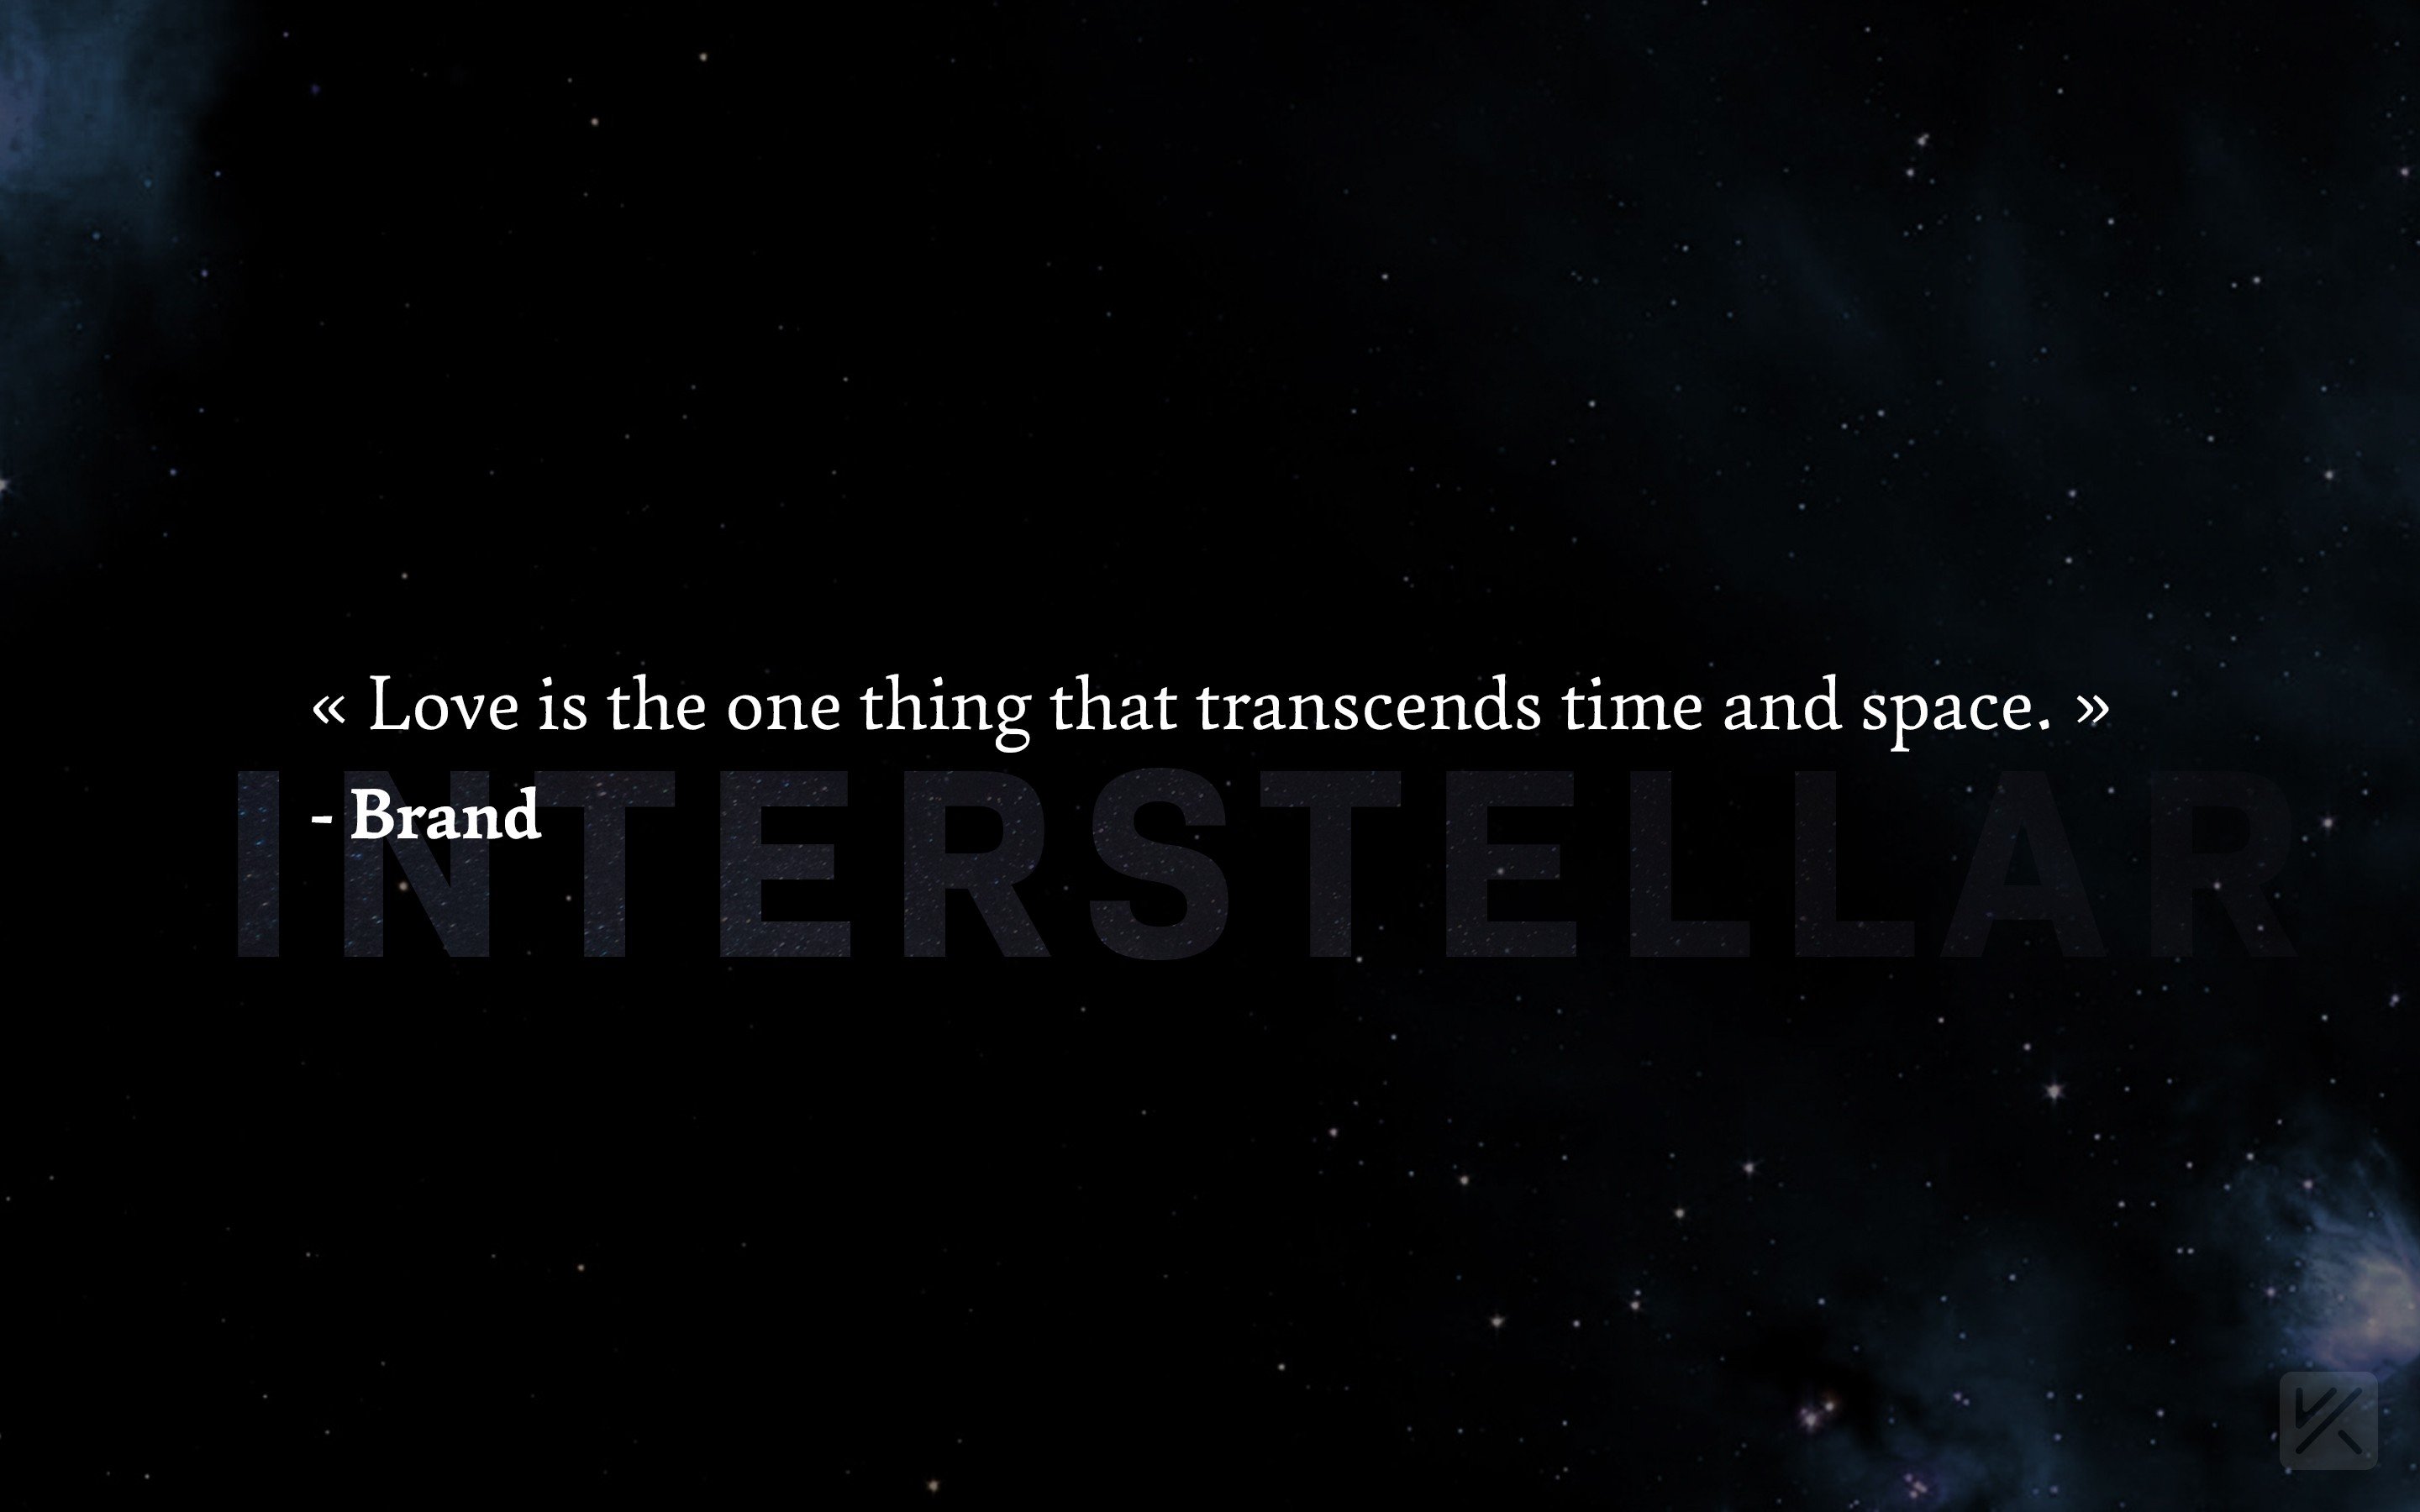 Interstellar Movie Love Inspirational Space Quote Motivational Life Hd Wallpapers Desktop And Mobile Images Photos